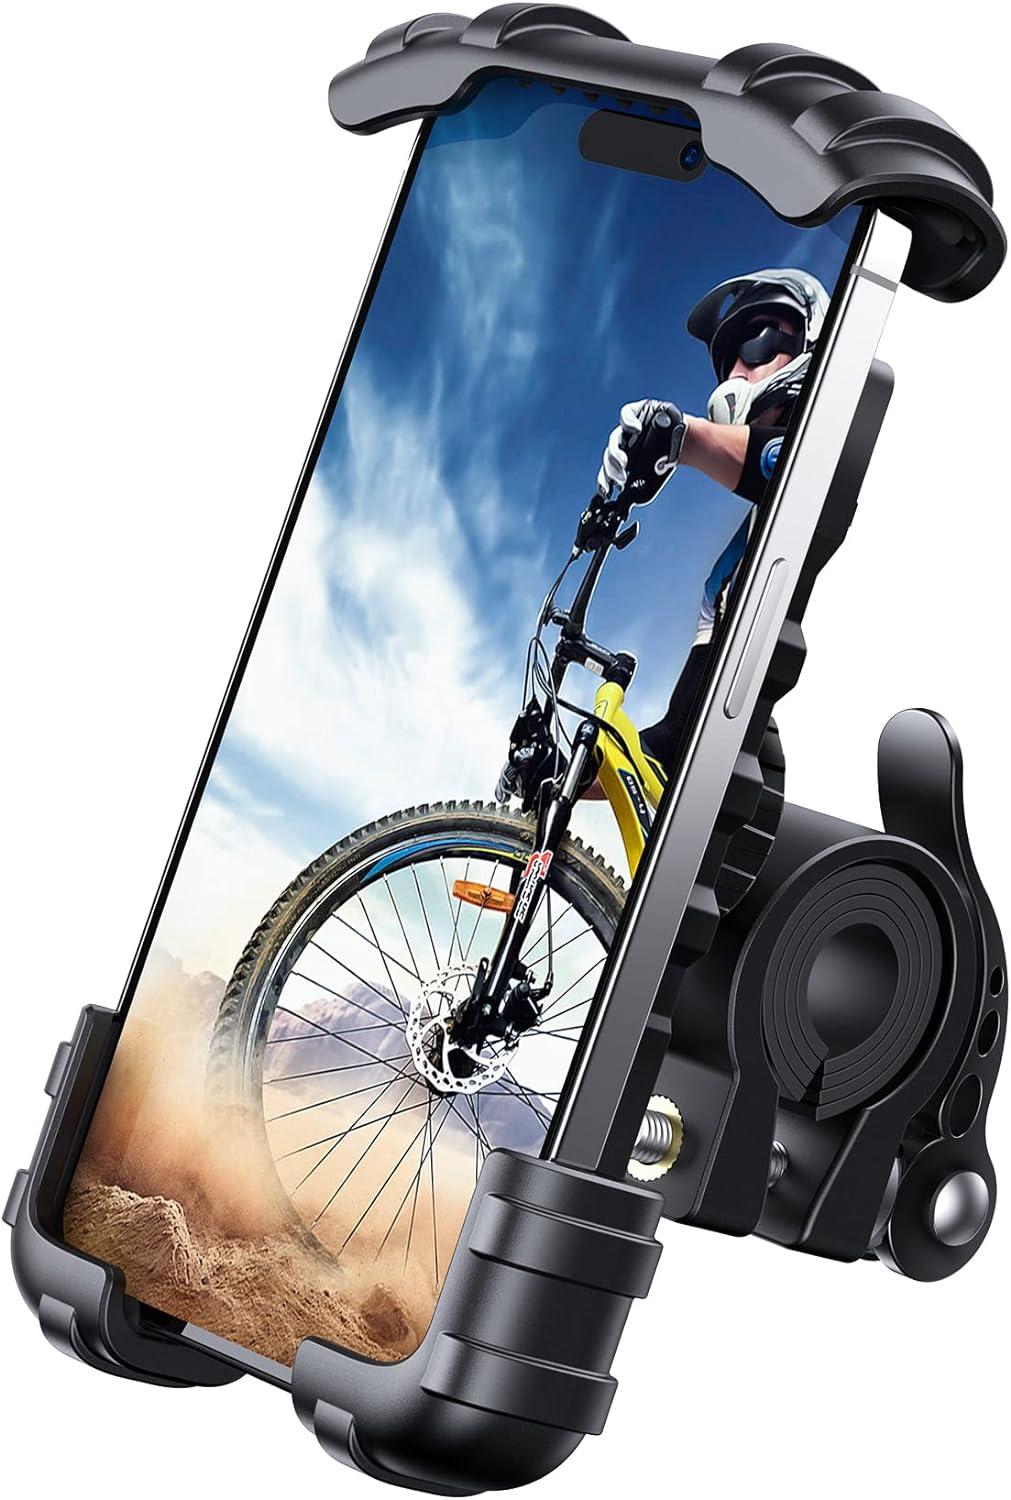 Lamicall Bike Phone Holder, Motorcycle Phone Mount - Motorcycle Handlebar Cell Phone Clamp, Scooter Phone Clip for iPhone 15 Pro Max/Plus, 14 Pro Max, S9, S10 and More 4.7" to 6.8" Smartphones